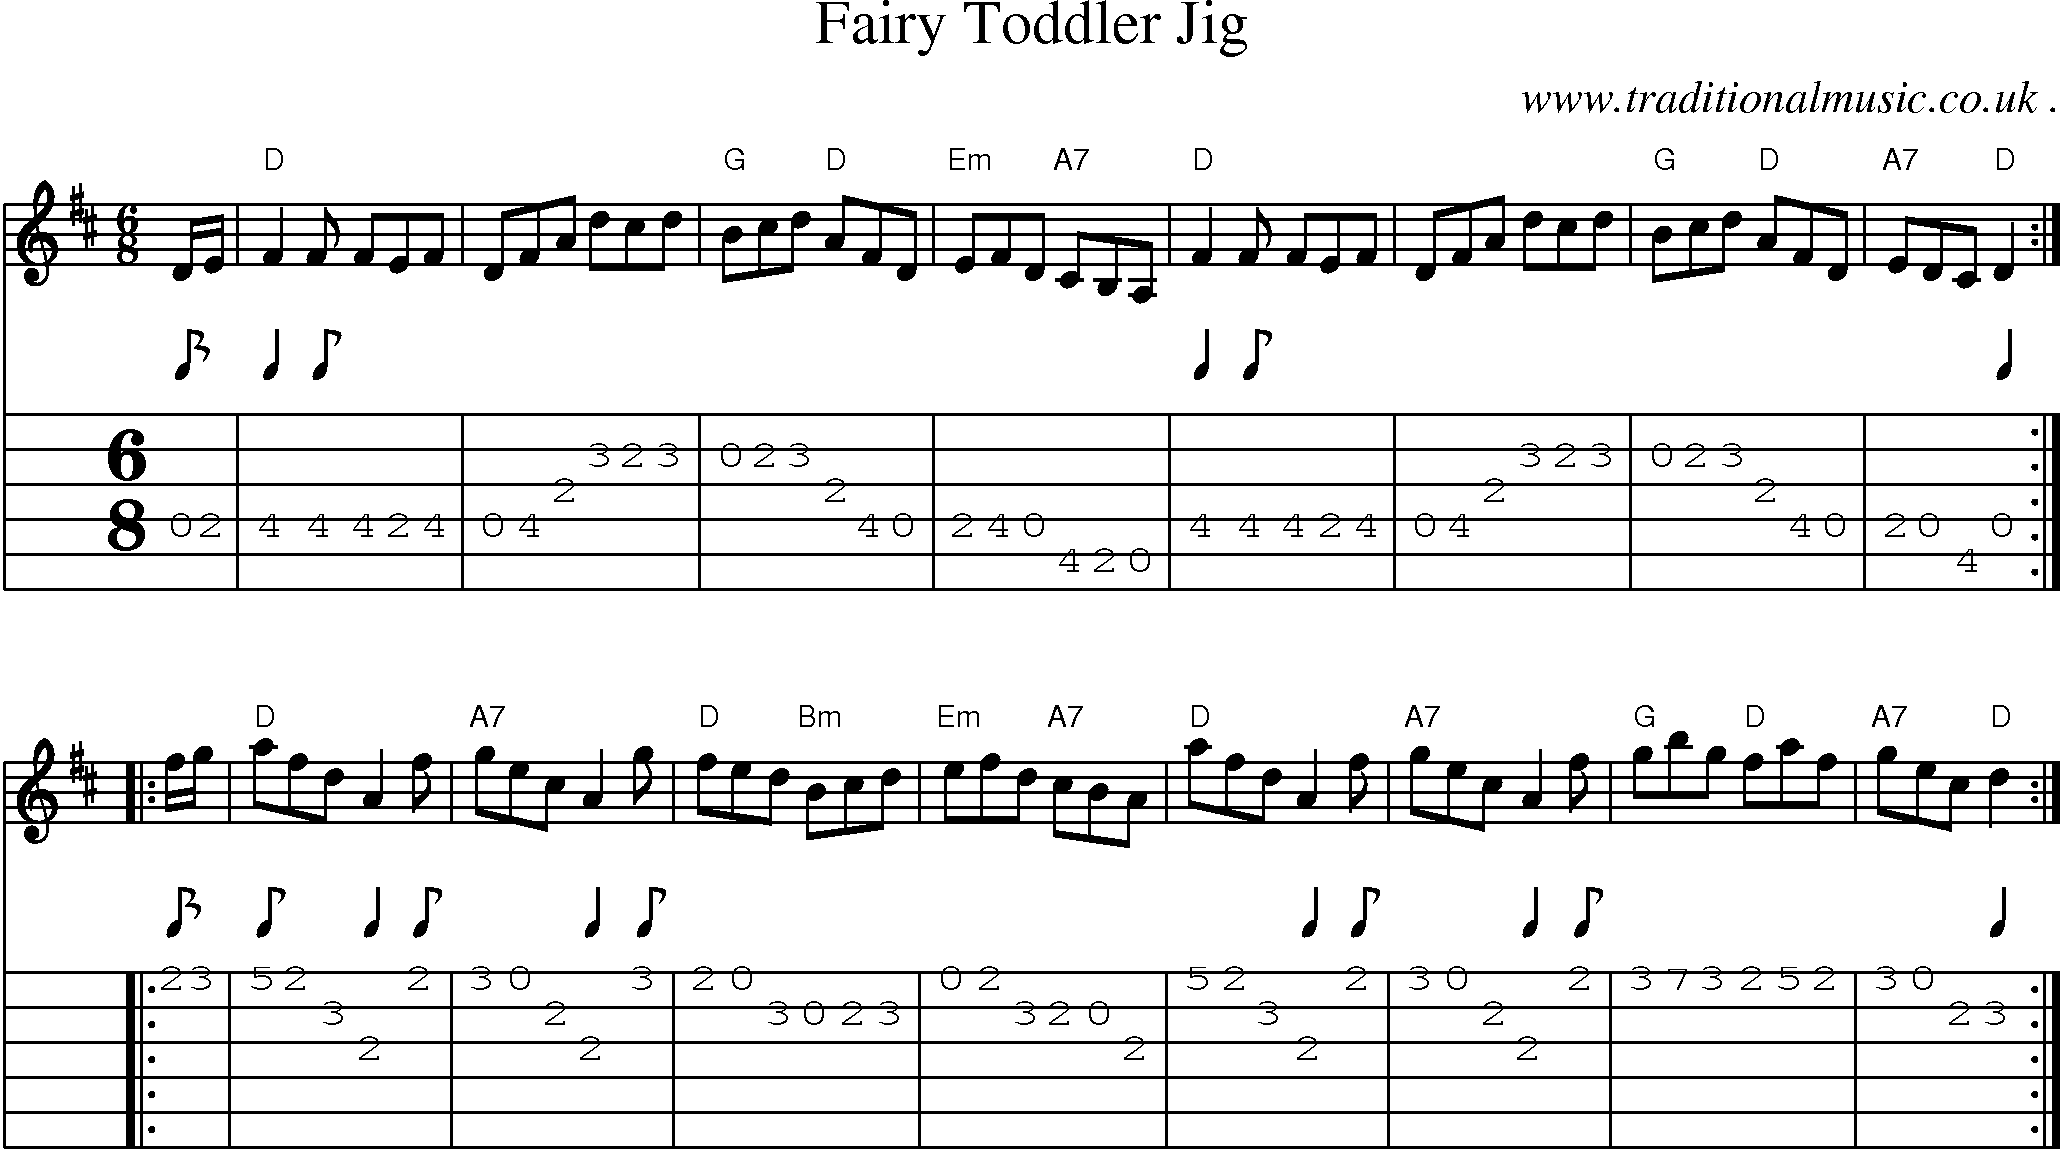 Sheet-music  score, Chords and Guitar Tabs for Fairy Toddler Jig